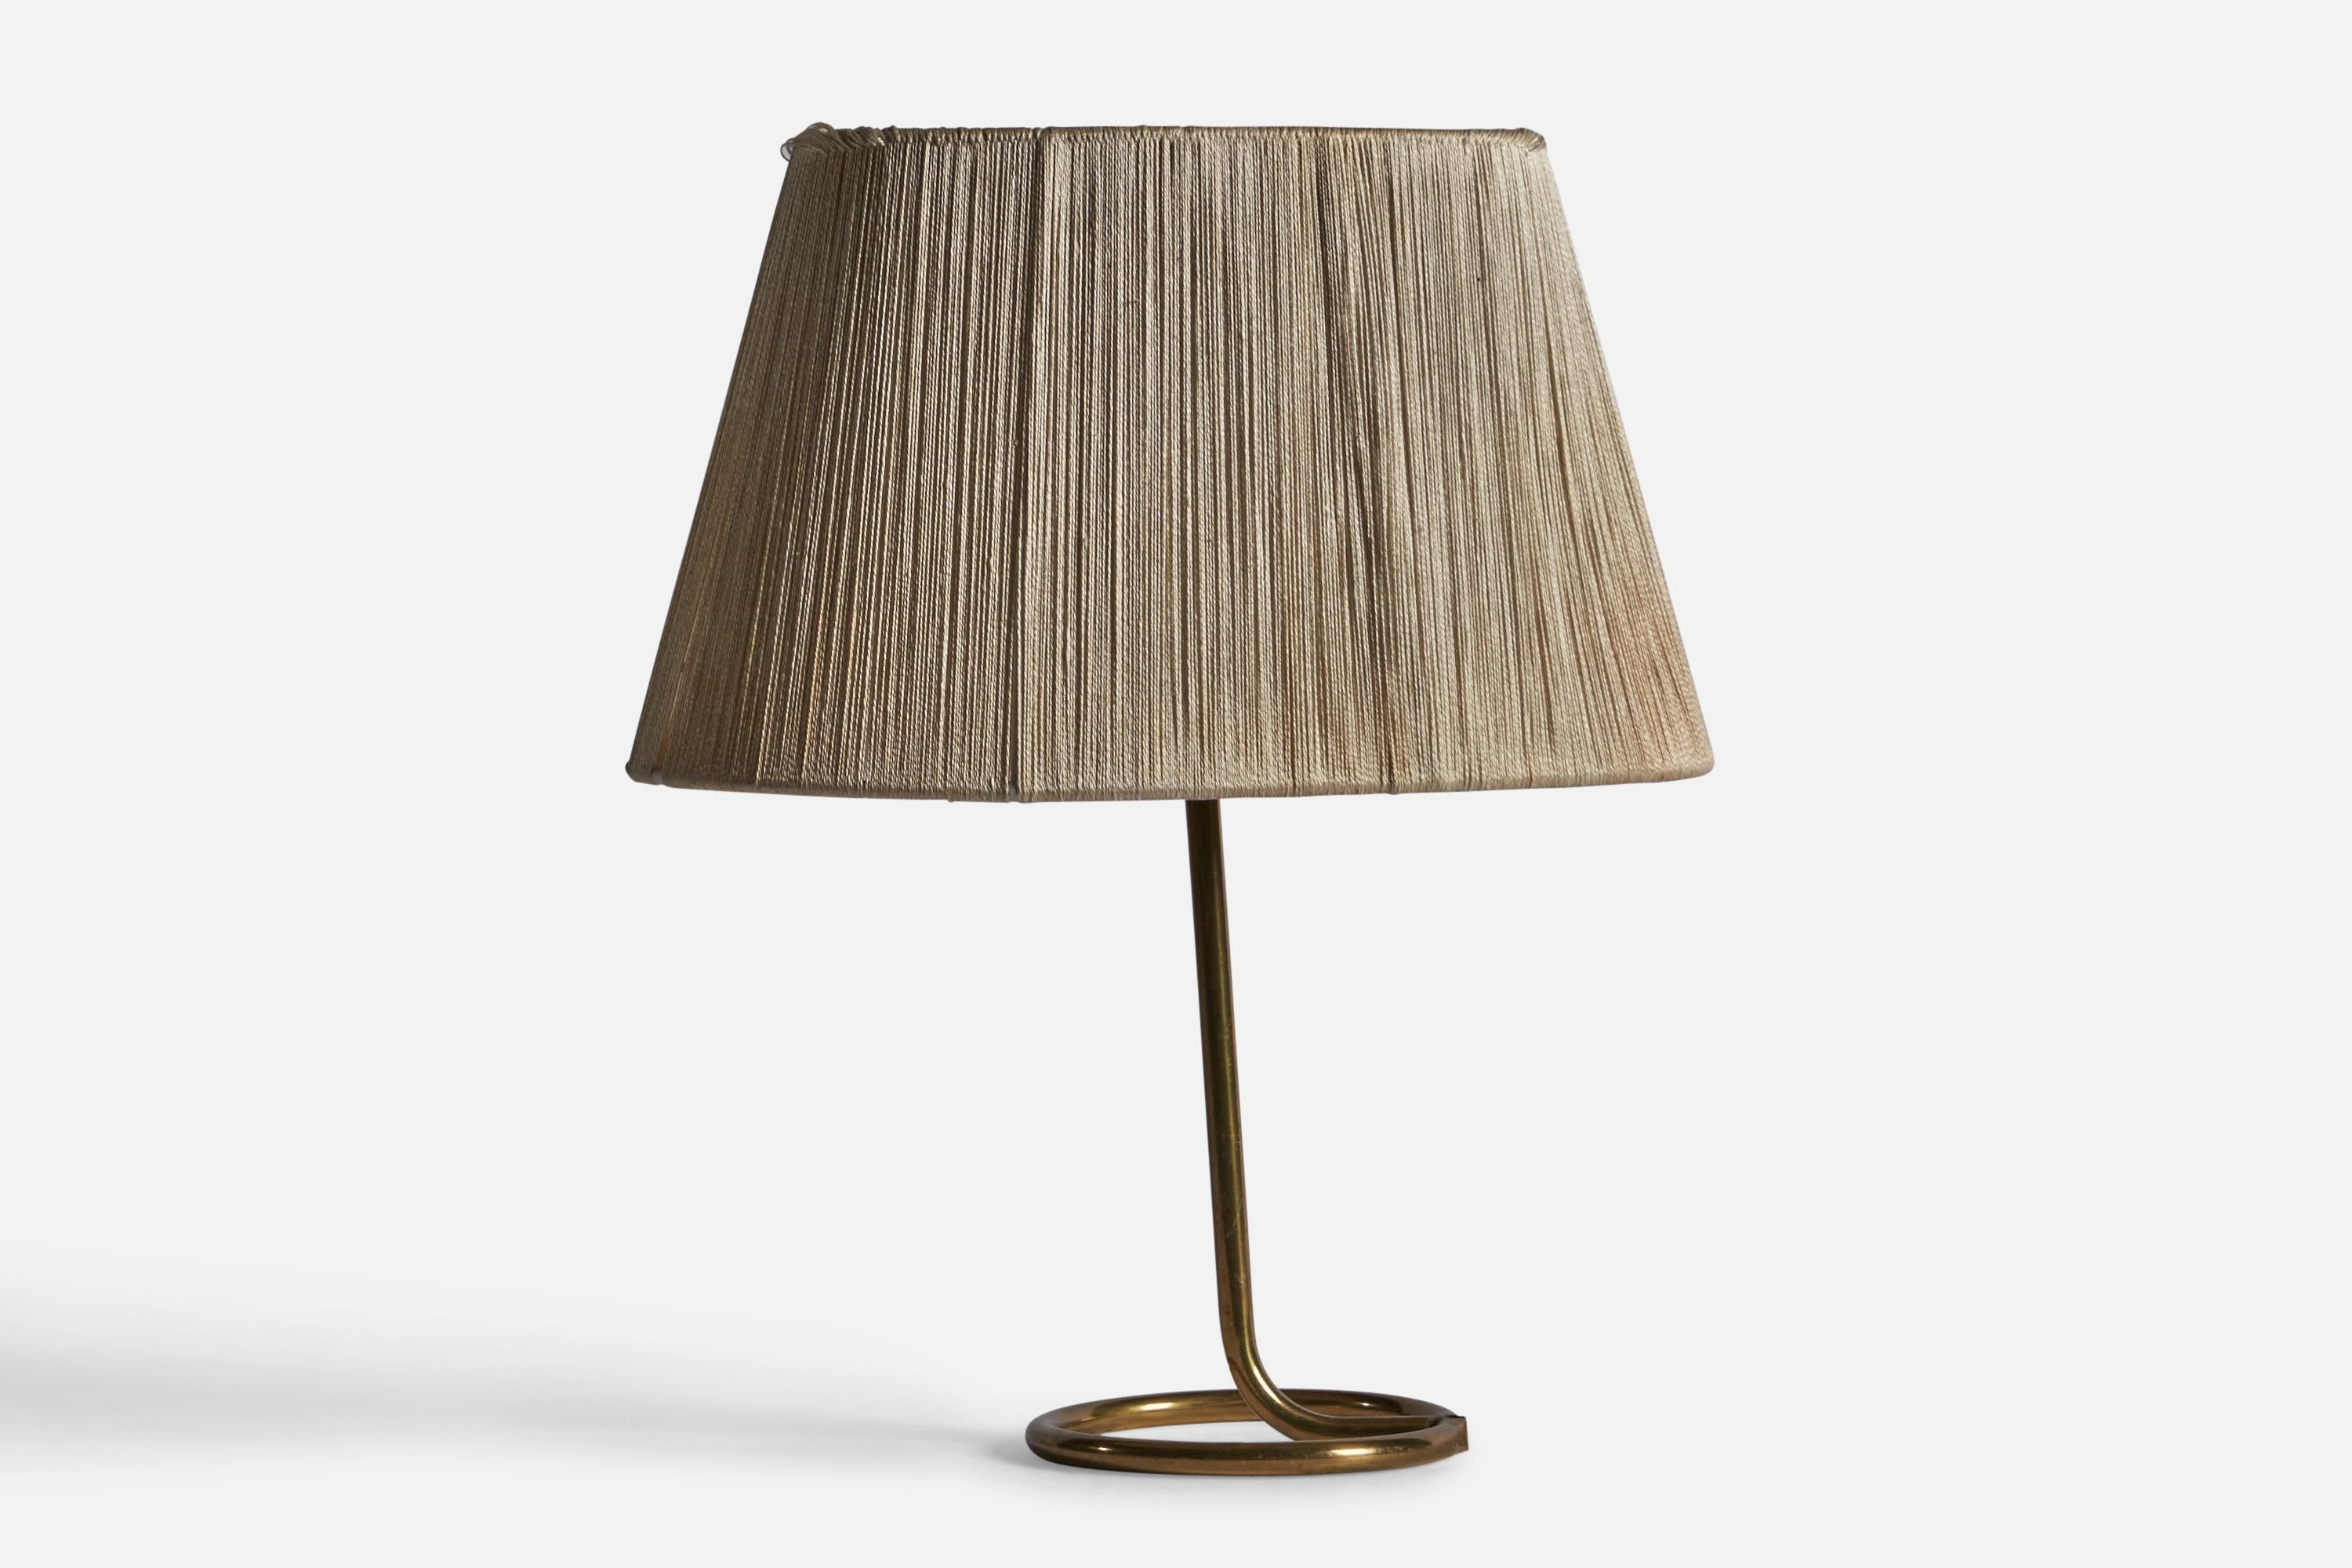 A brass and fabric string table lamp, designed and produced in Sweden, c. 1950s.

Overall Dimensions: 14.4